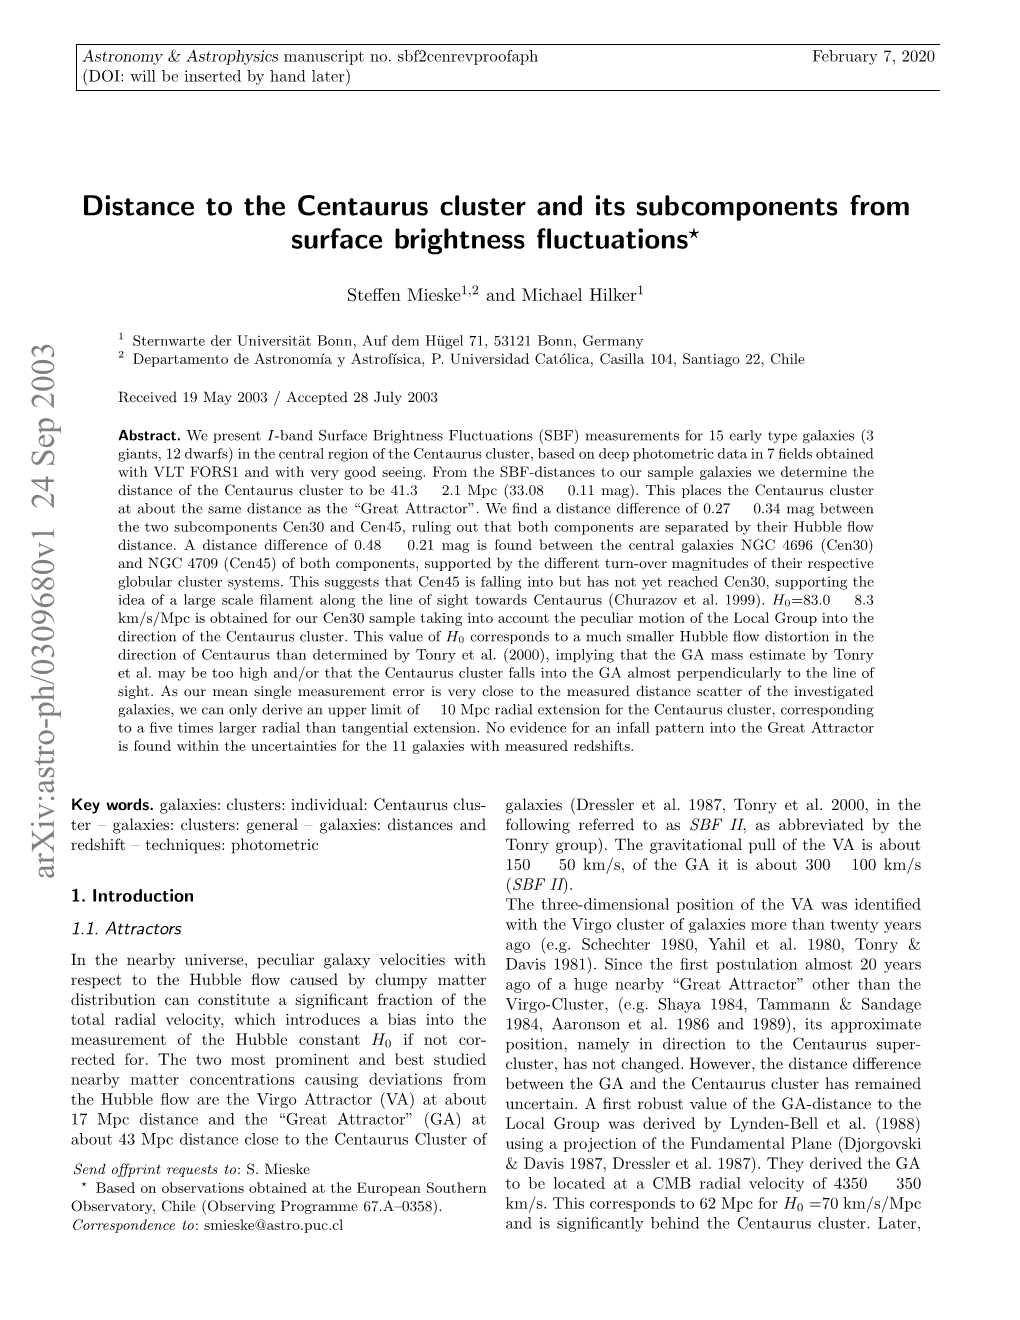 Distance to the Centaurus Cluster and Its Subcomponents from Surface Brightness Fluctuations